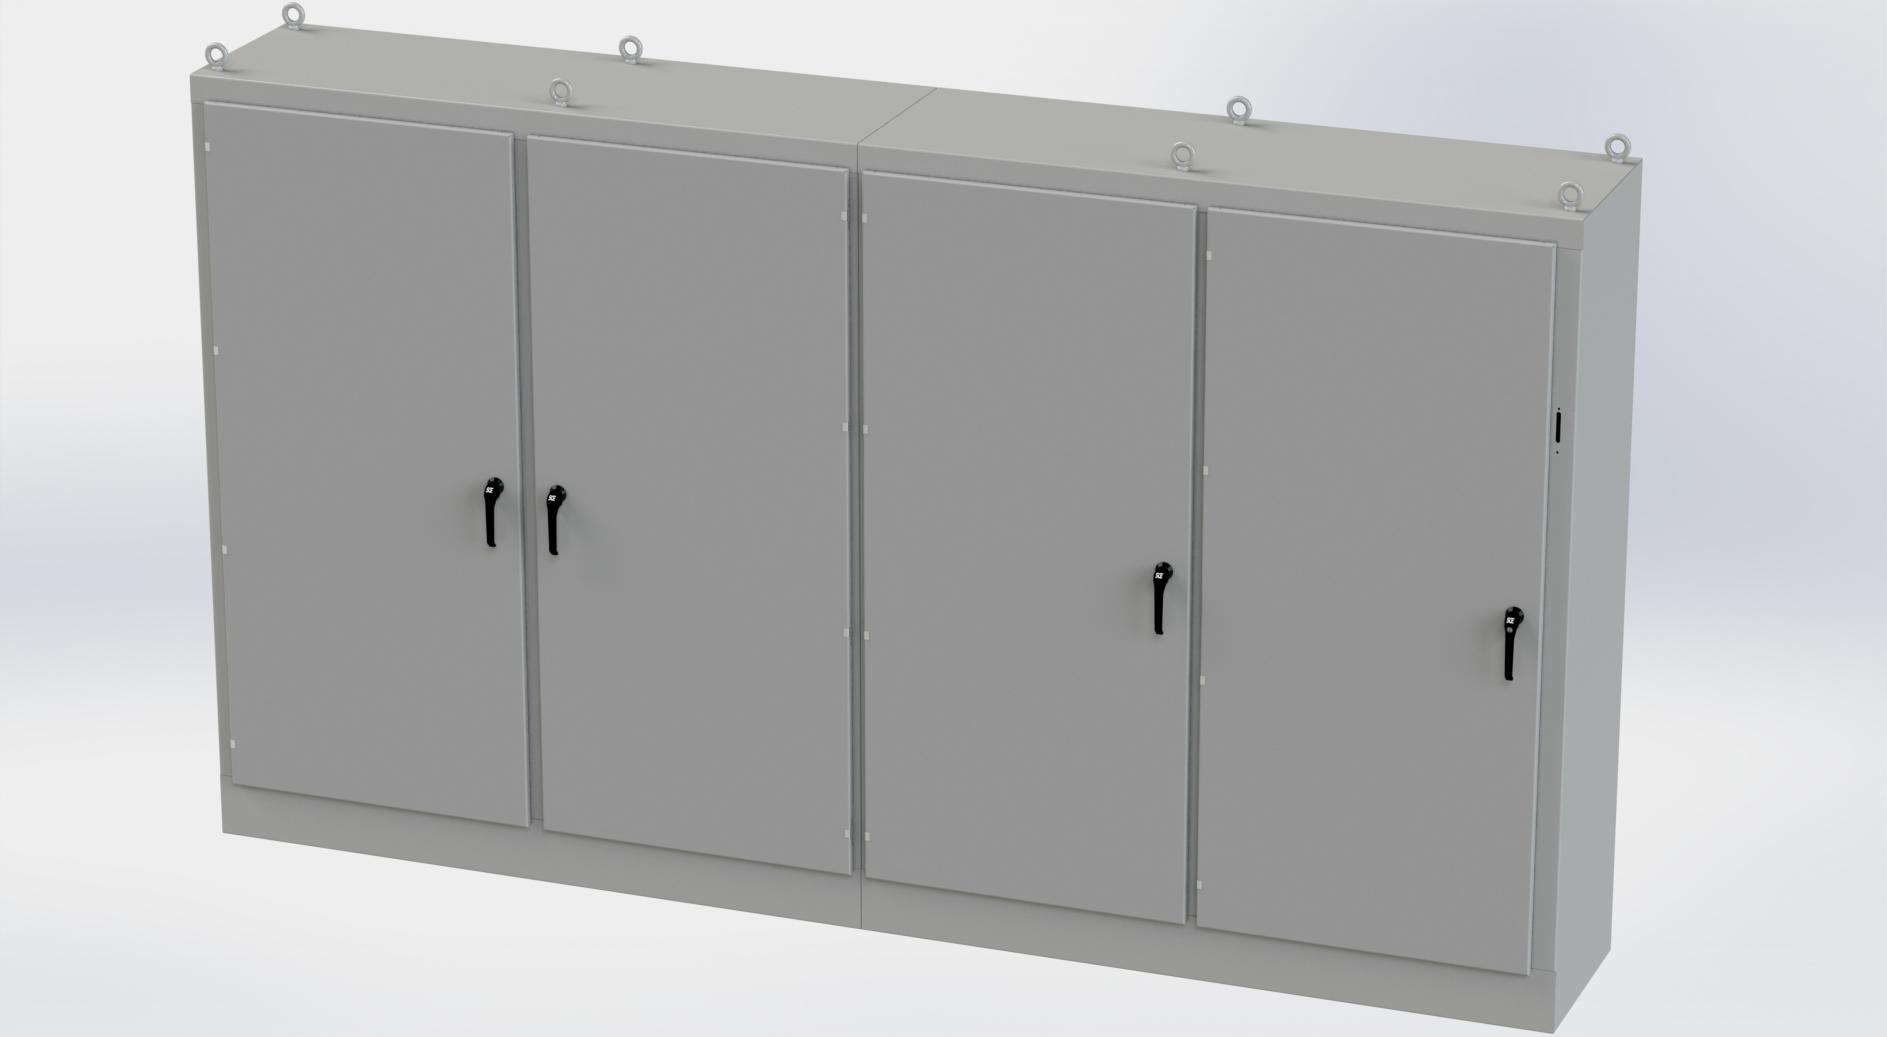 Saginaw Control SCE-90XM4EW24G 4DR XM Enclosure, Height:90.00", Width:157.50", Depth:24.00", ANSI-61 gray powder coating inside and out. Subpanels are powder coated white.